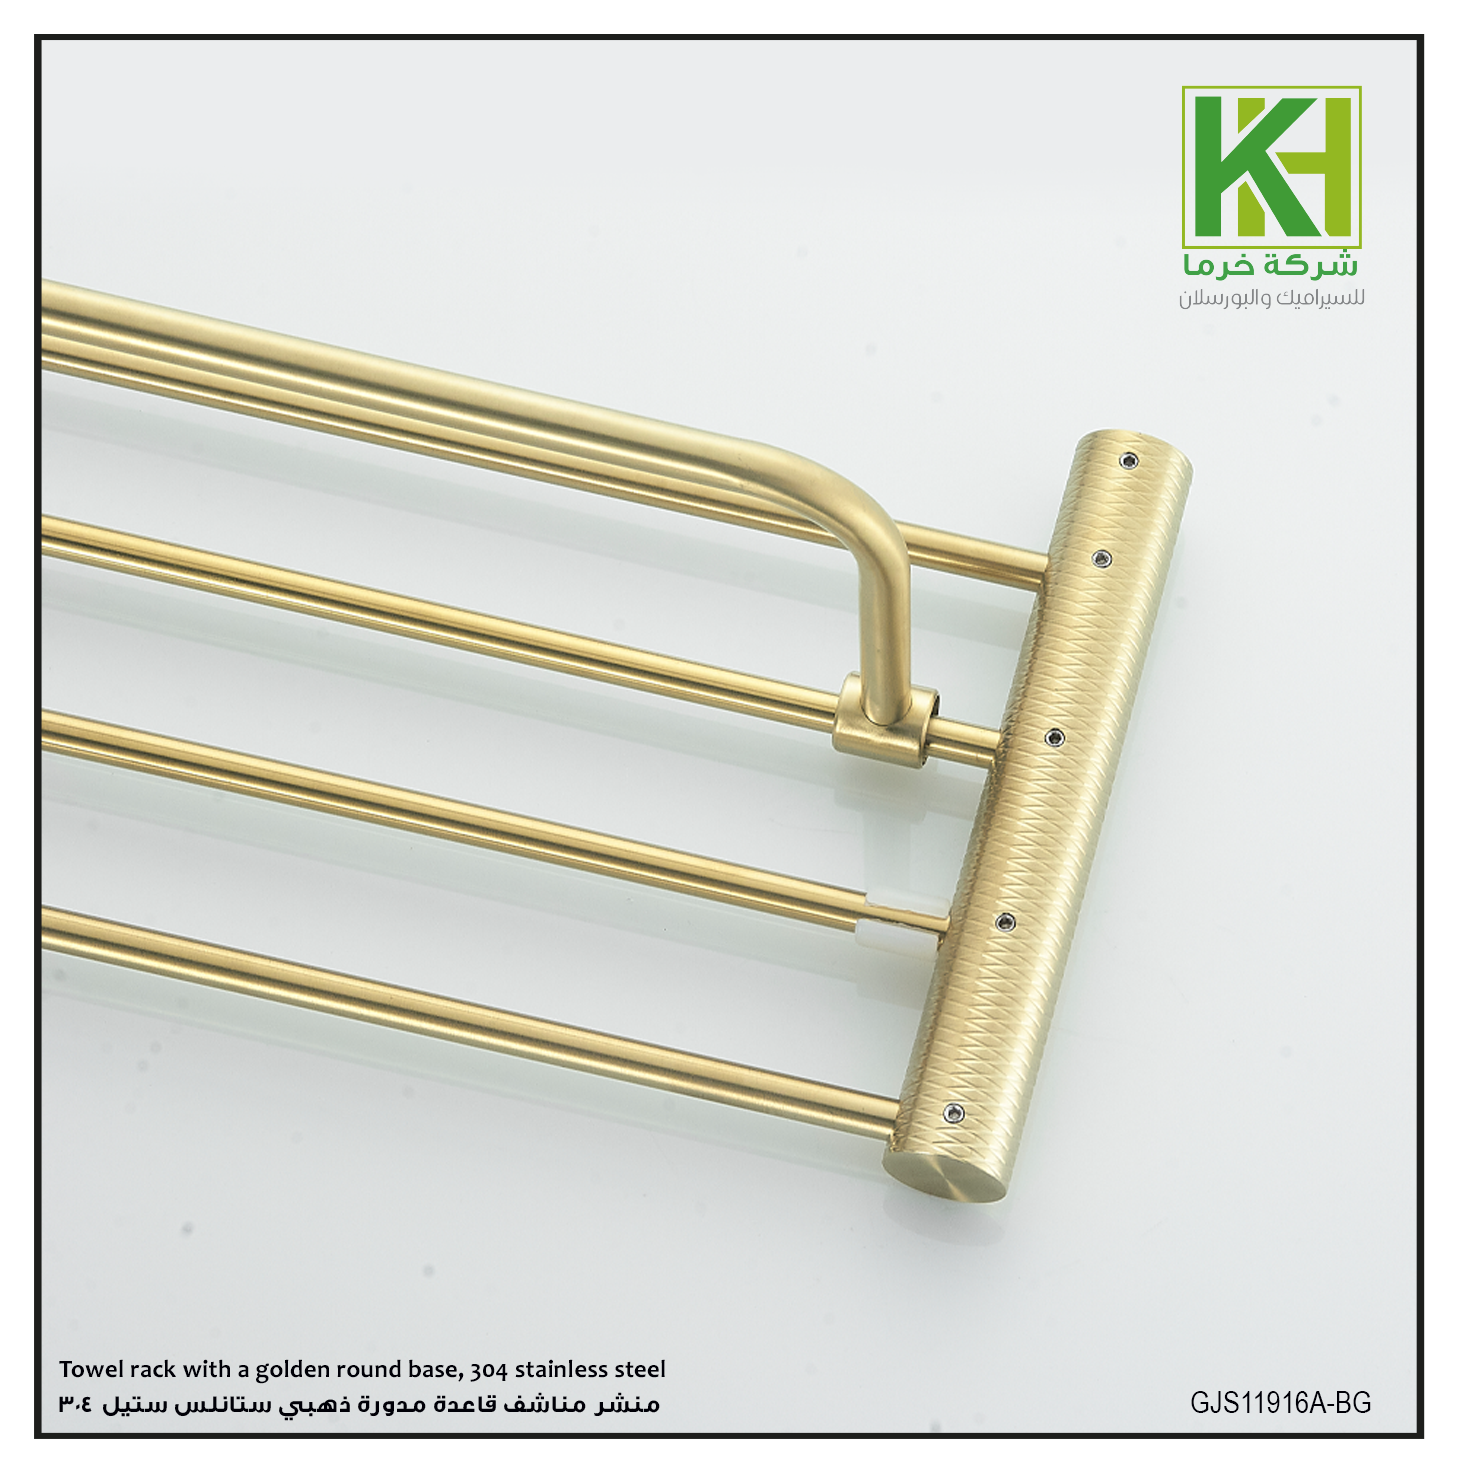 Picture of Towel rack with a golden round base, 304 stainless steel